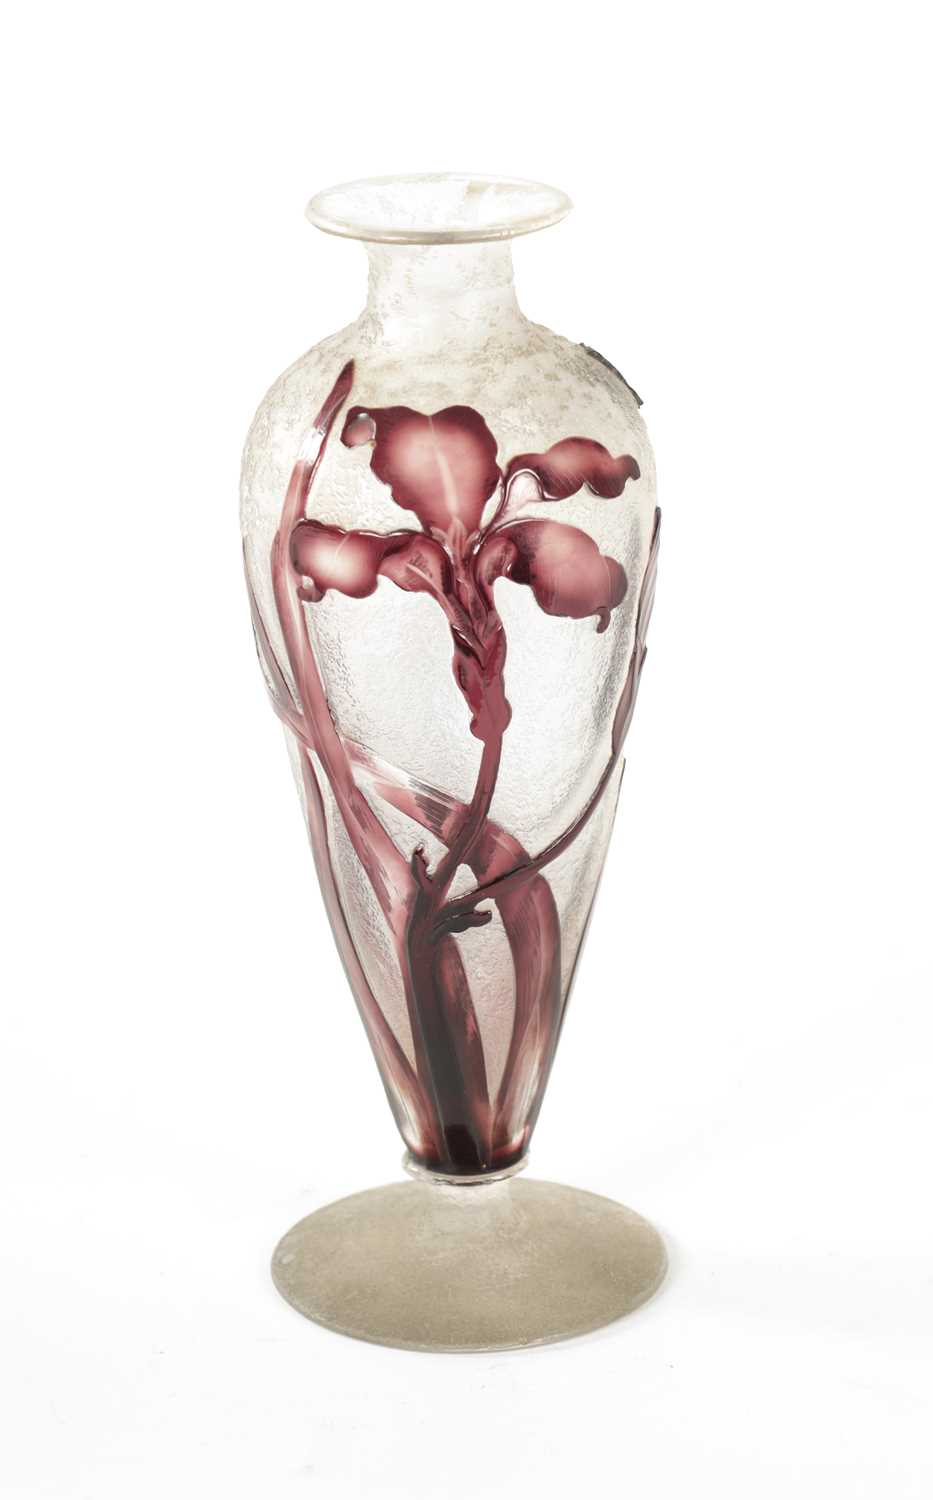 Lot 2 - AN EARLY 20TH CENTURY DAUM NANCY SHOULDERED TAPERING CAMEO AND WHEEL-CARVED FROSTED GLASS VASE